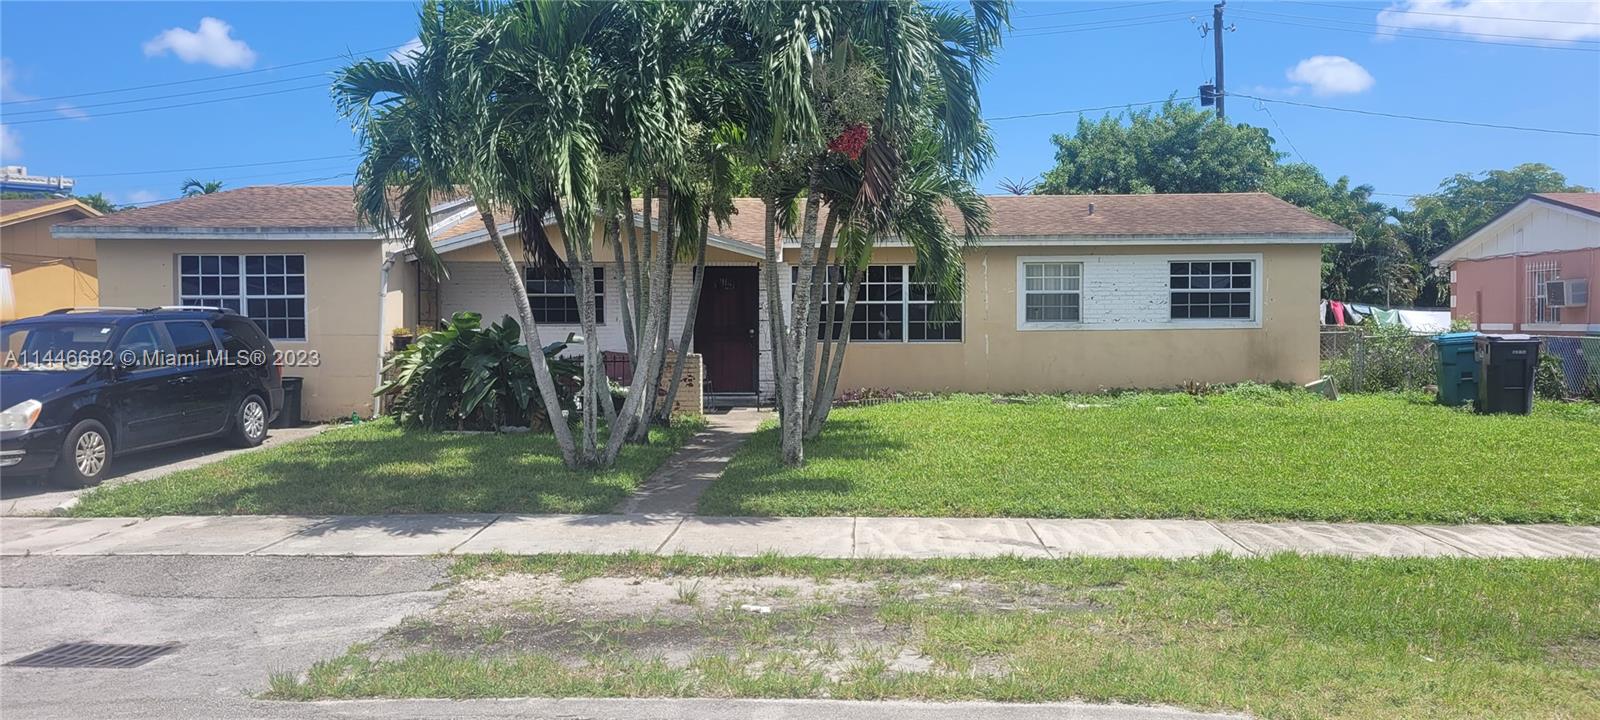 21221 NW 27th Ct  For Sale A11446682, FL